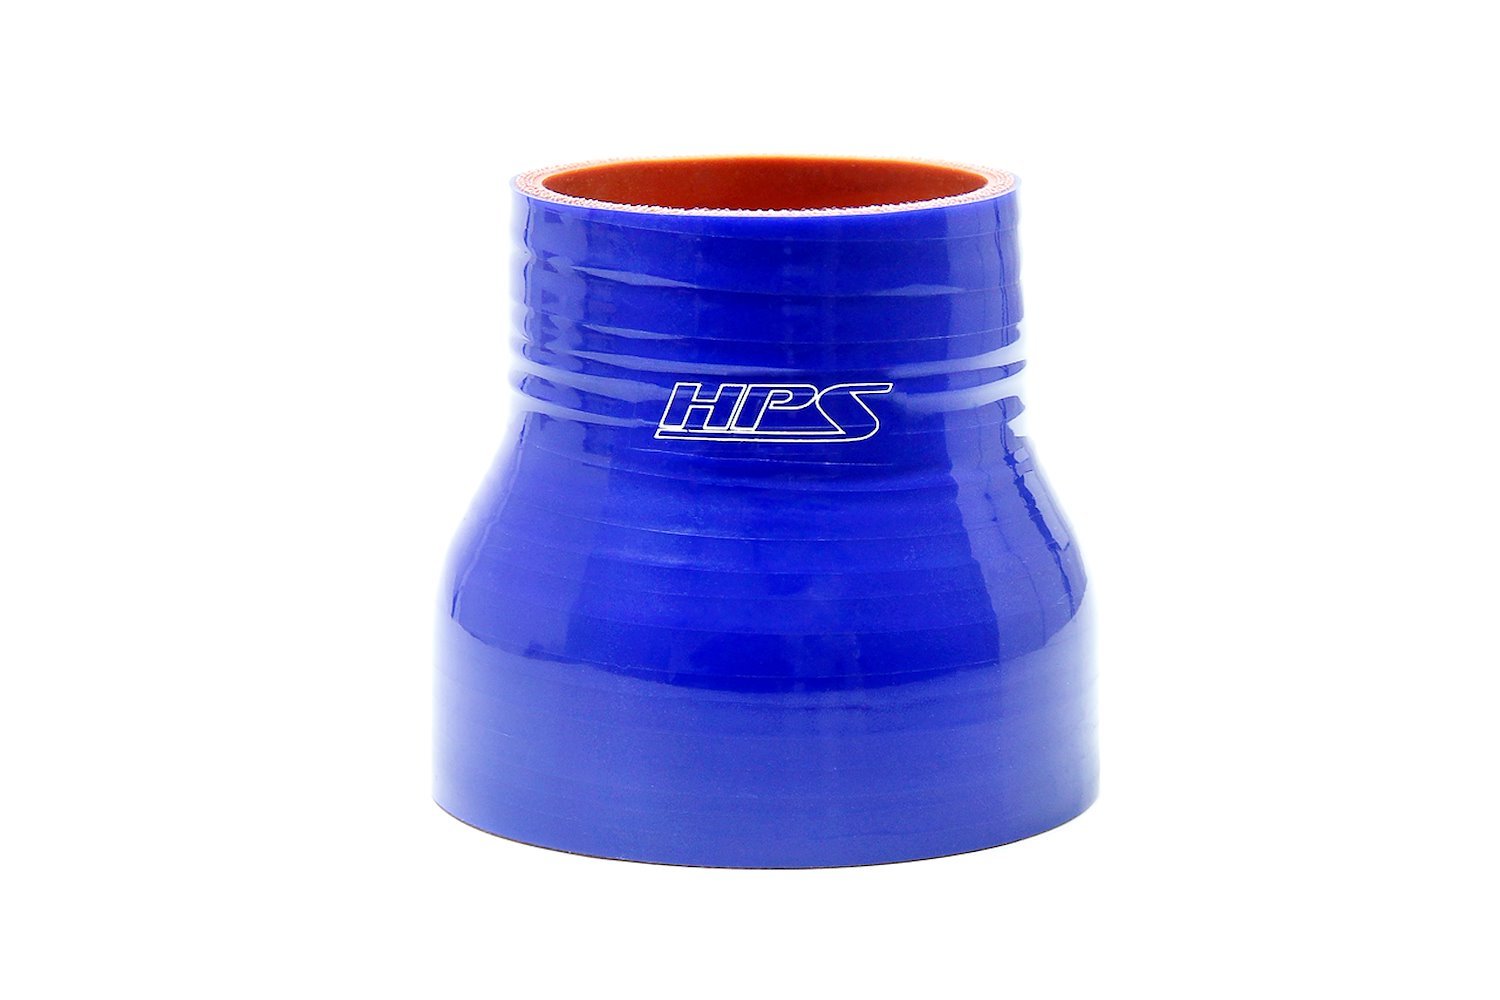 HTSR-300-350-L4-BLUE Silicone Reducer Hose, High-Temp 4-Ply Reinforced, 3 in. - 3-1/2 in. ID, 4 in. Long, Blue